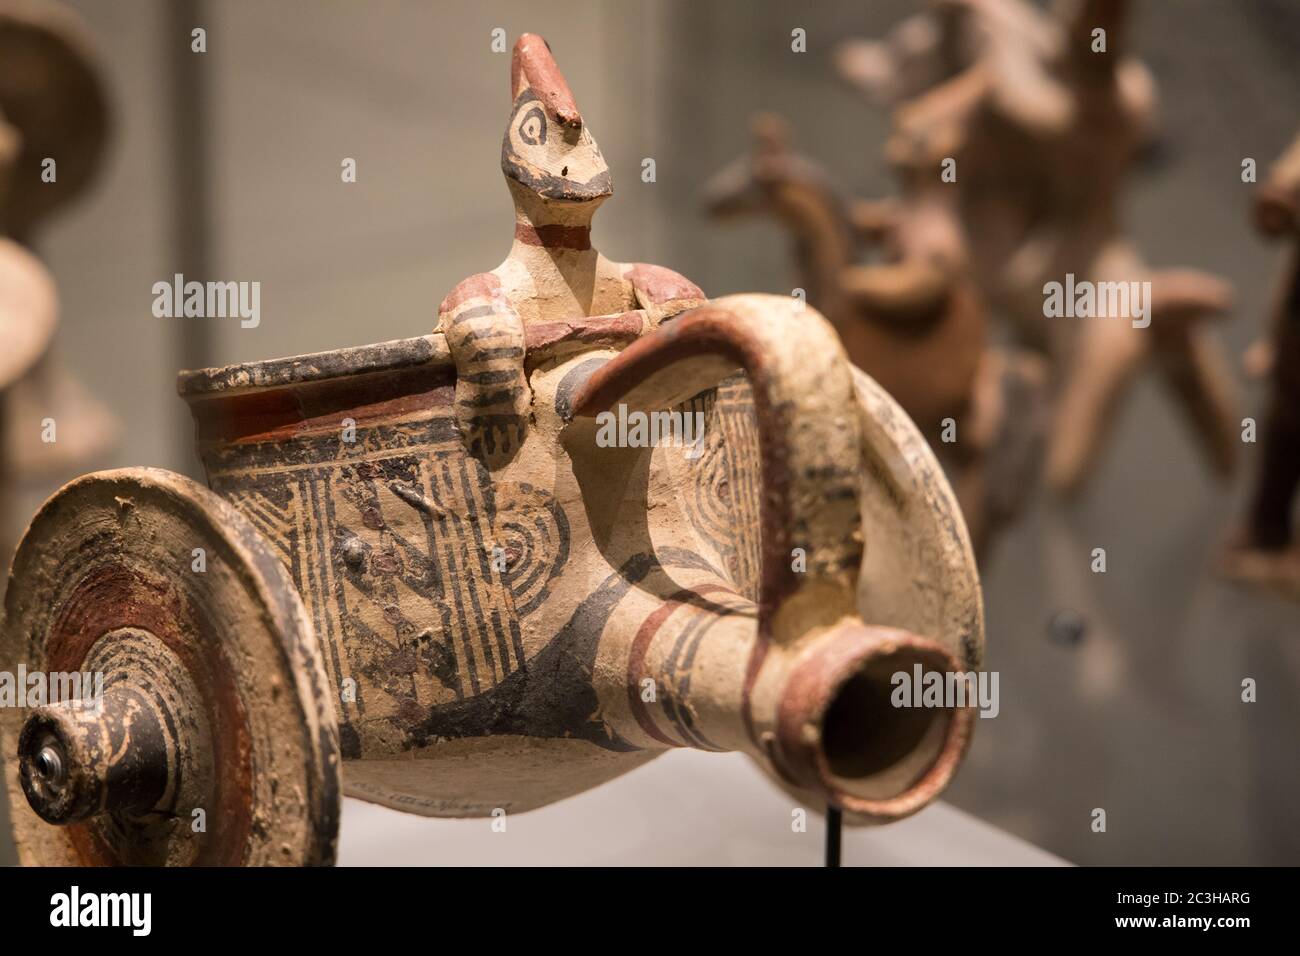 Leiden, The Netherlands - JAN 04, 2020: closeup of small terracotta warrior chariot figurine made from a jar from ancient Cyprus. Horse rider. Stock Photo